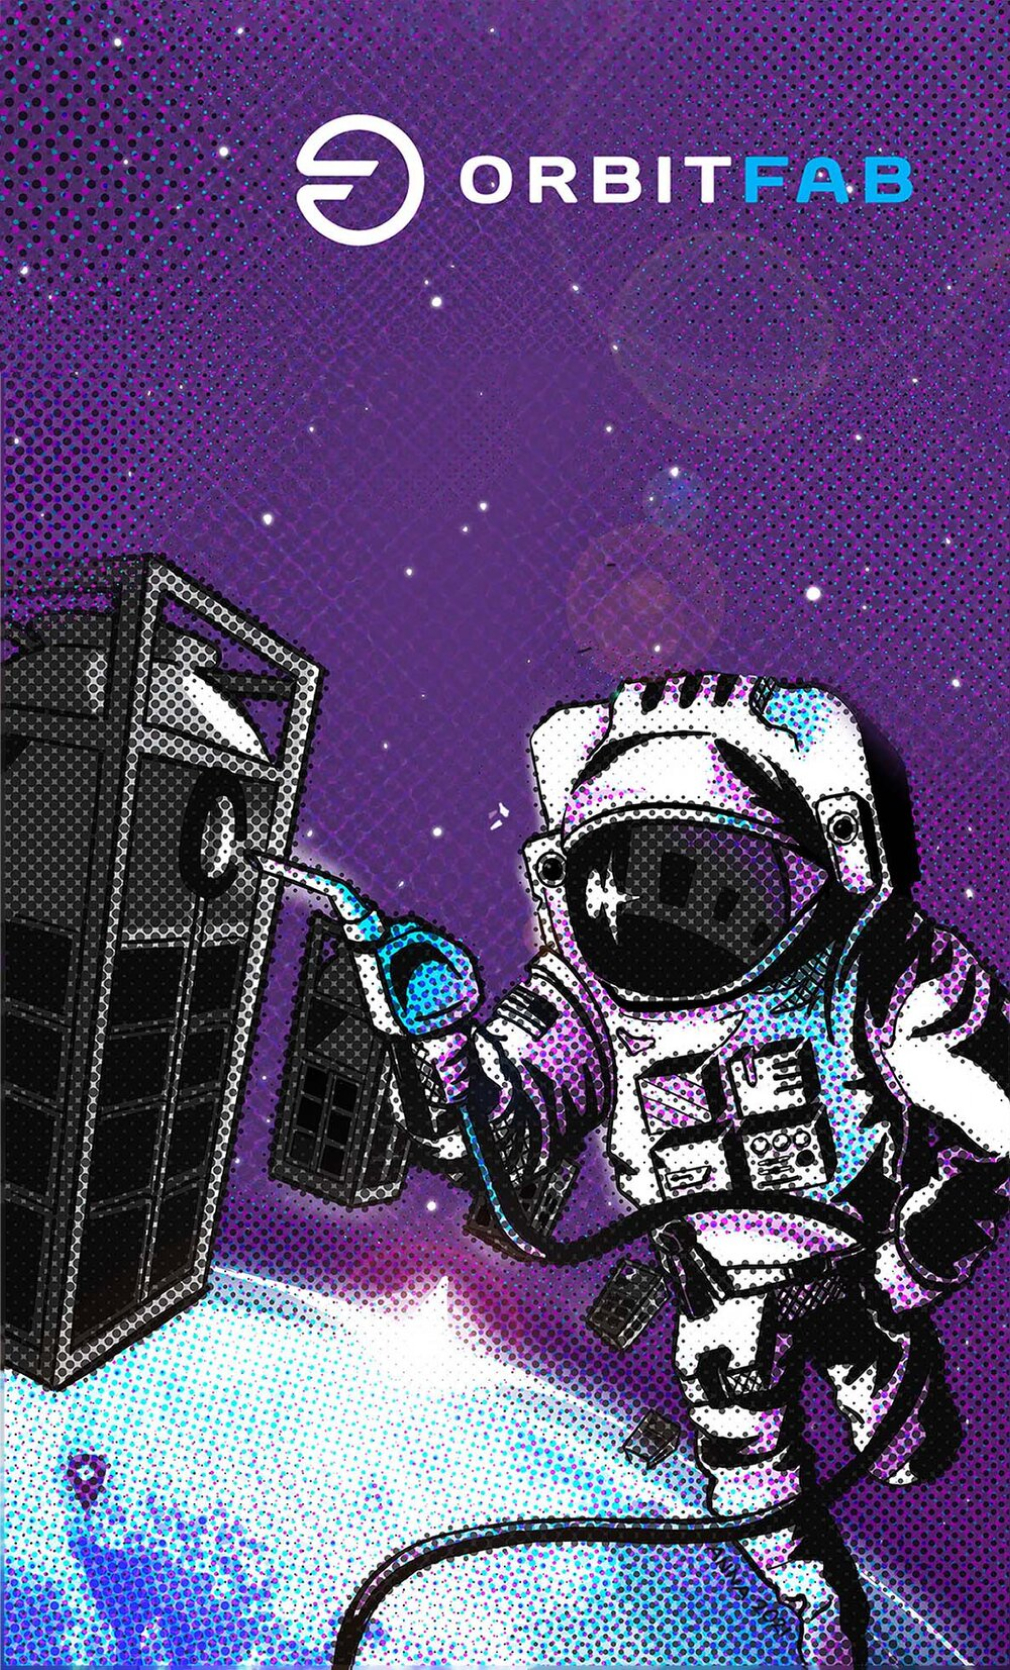 Astro Jockey artwork by Anna Shaposhnik for Orbit Fabis a digital illustration with purple and white and cyan colors that shows an astronaut refueling one tank in an array of tanks floating around Earth. It is adapted for poster and phone lockscreen formats.